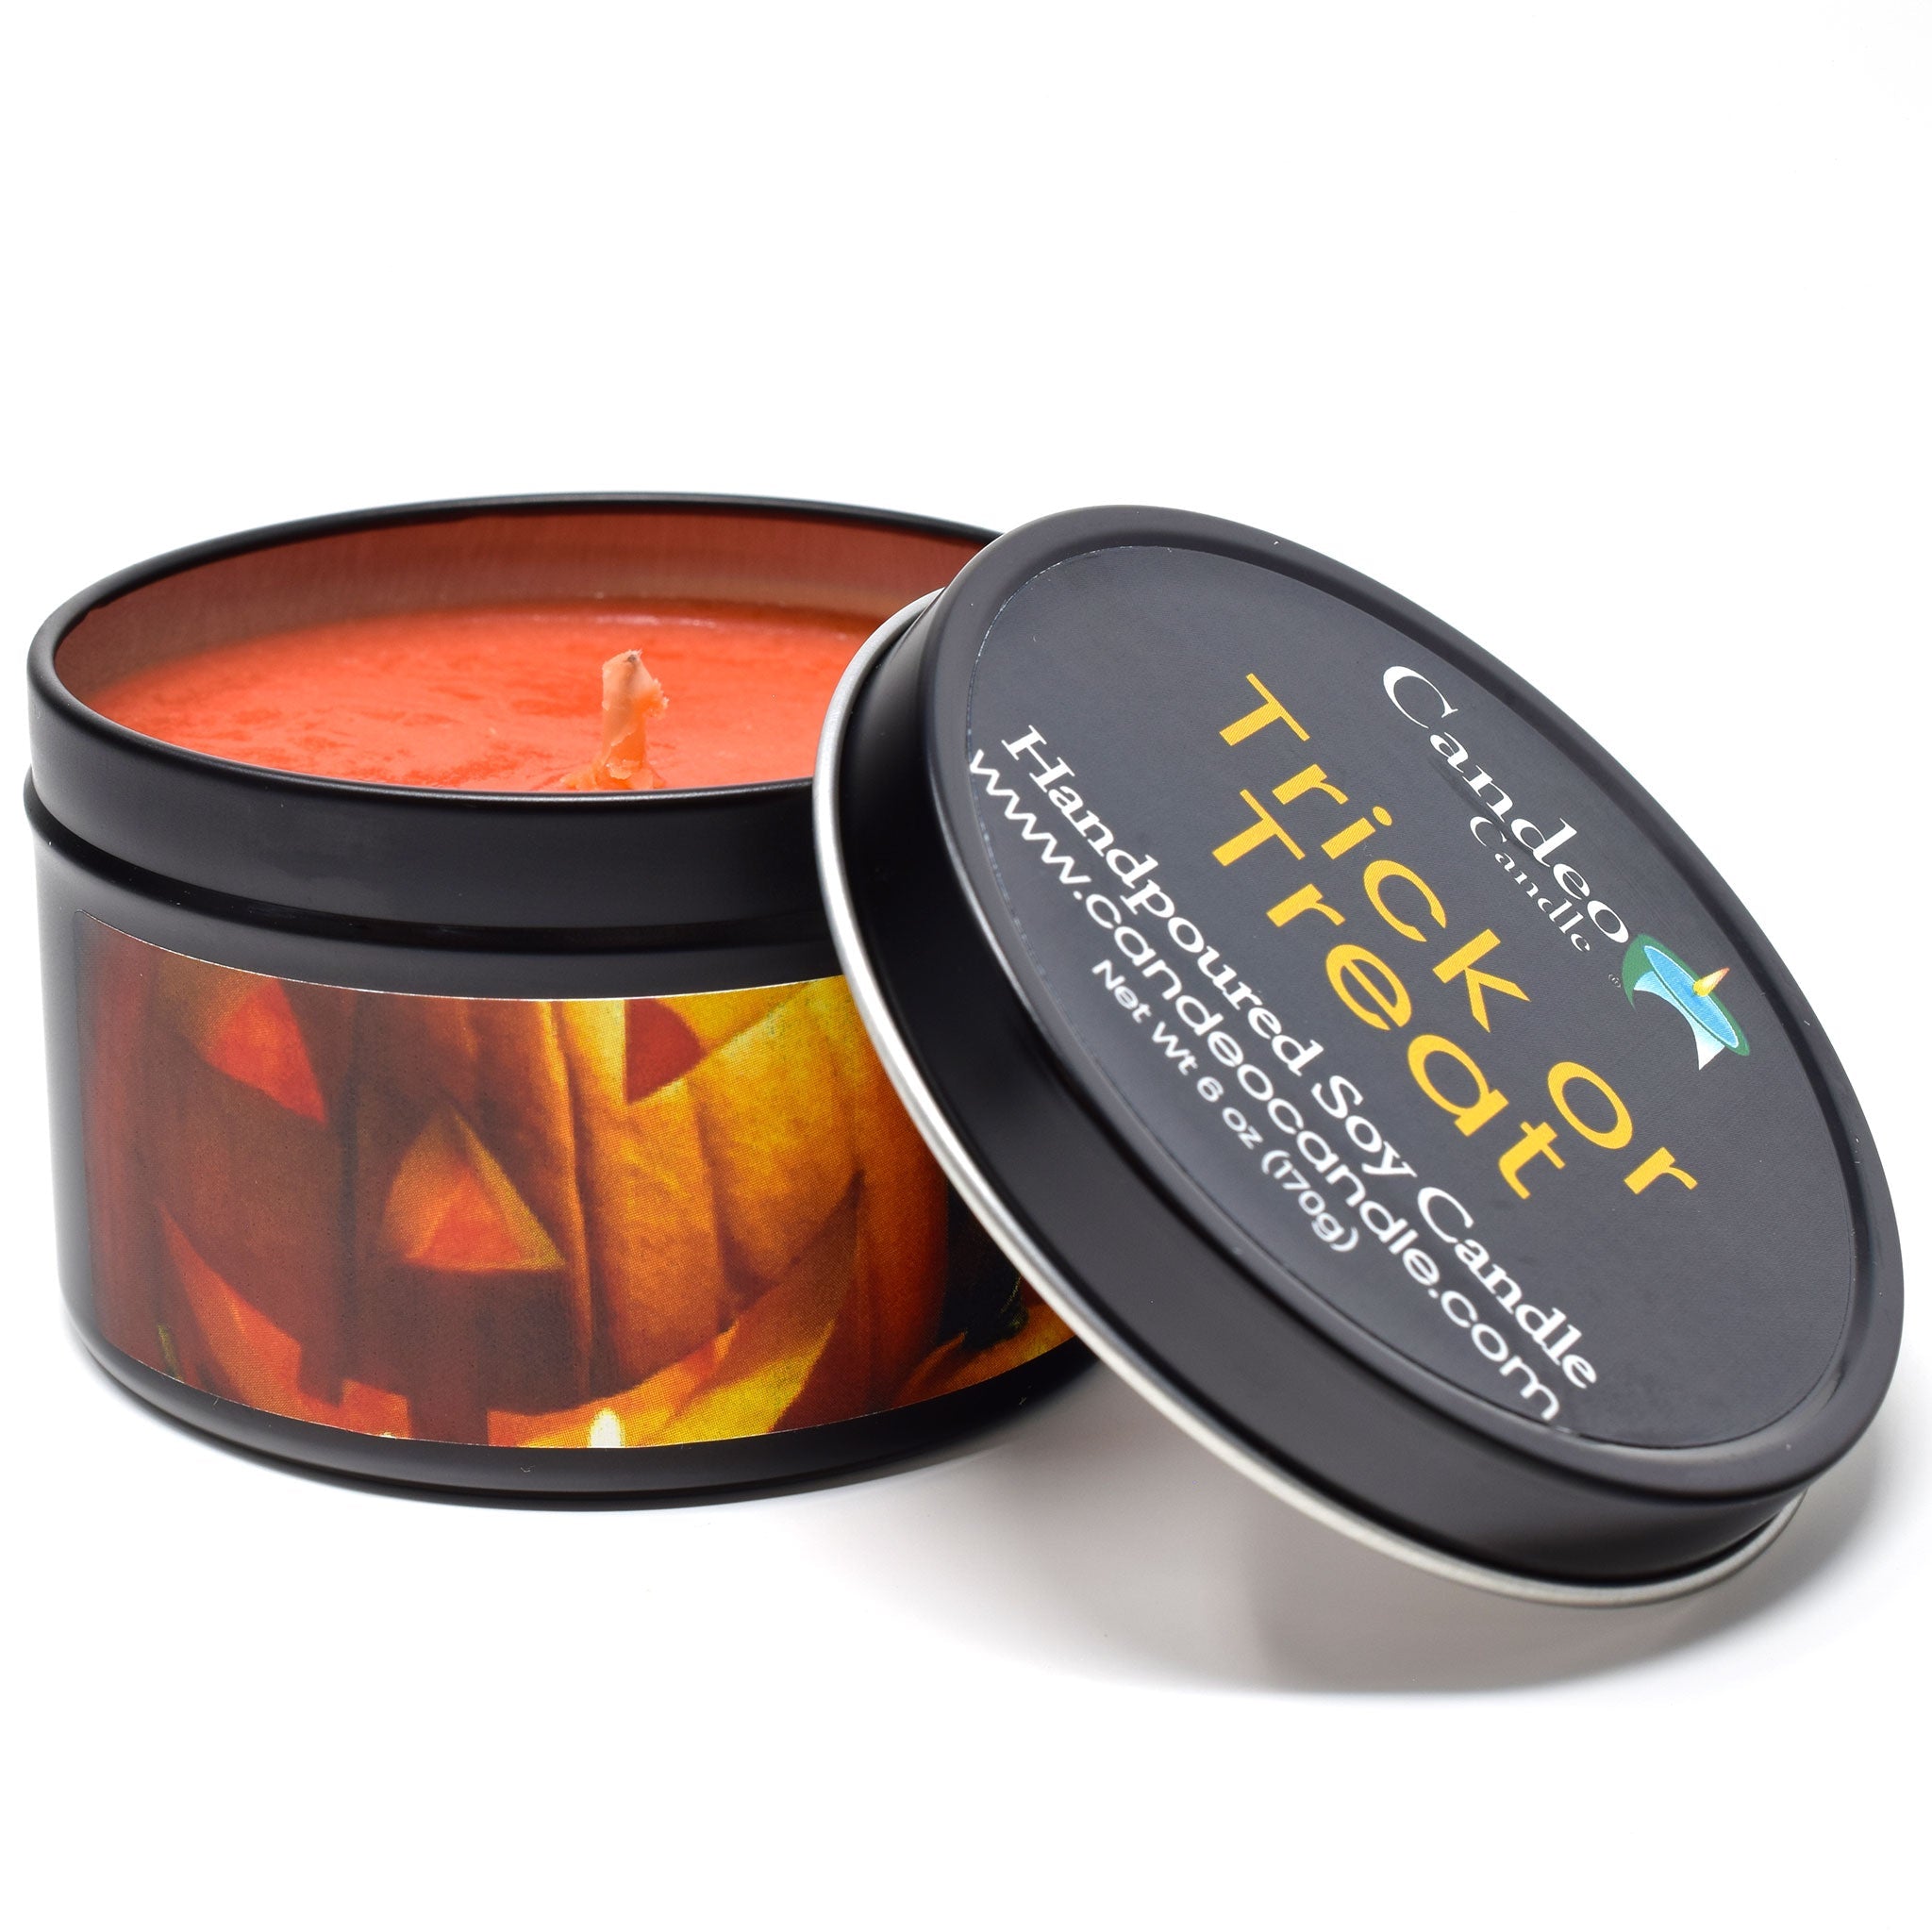 Trick or Treat, 6oz Soy Candle Tin - Candeo Candle